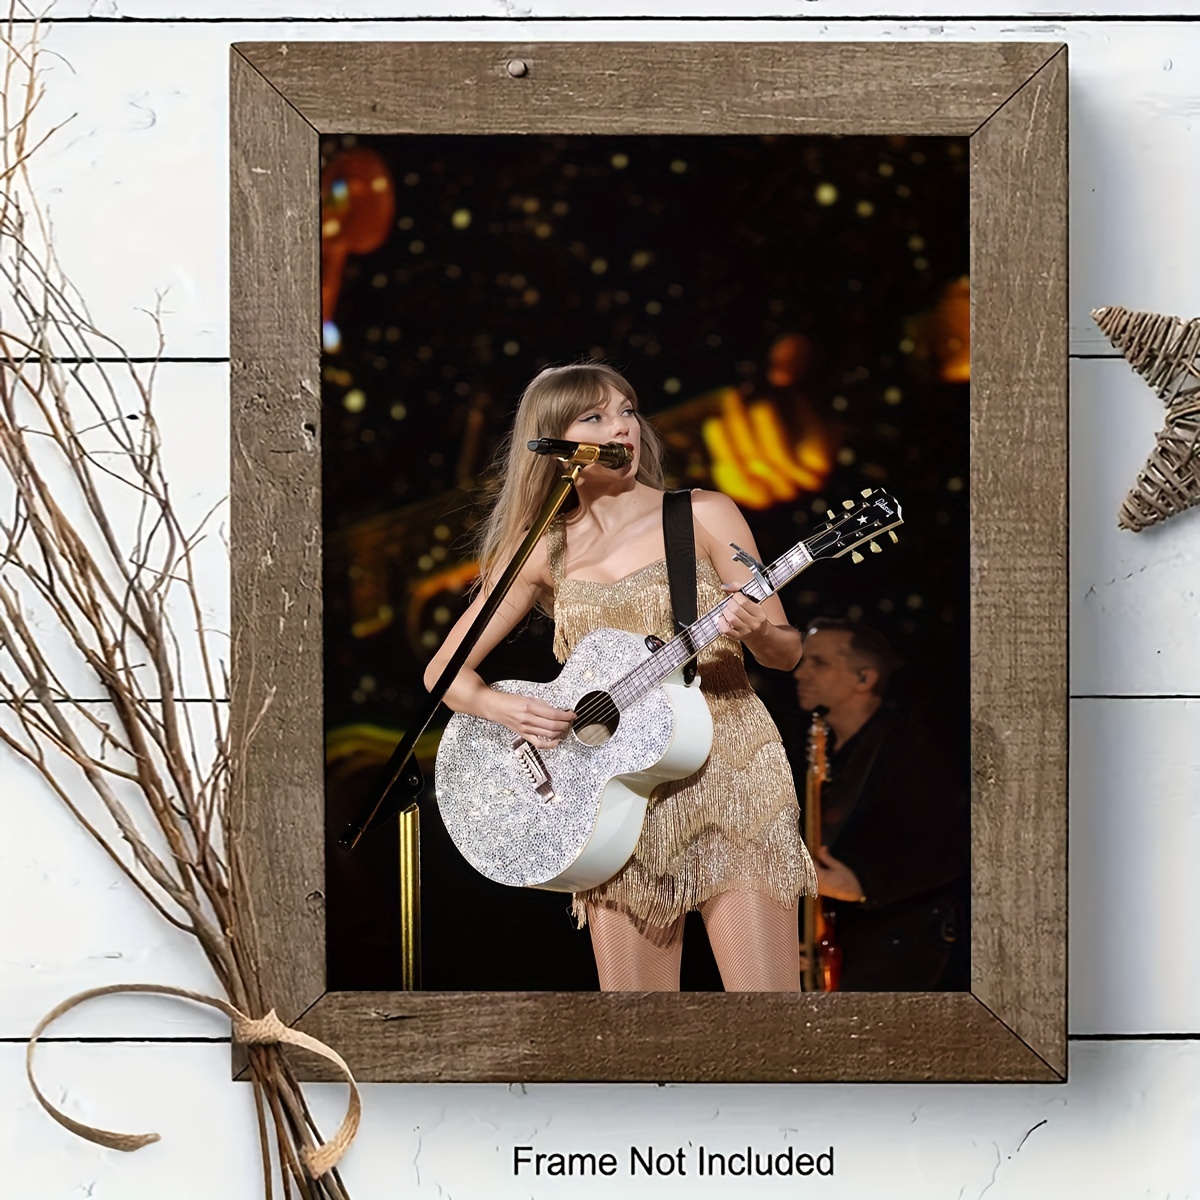 Taylor Swift Poster Girl Taylor Singer Canvas Wall Art Prints Room Decor  Poster